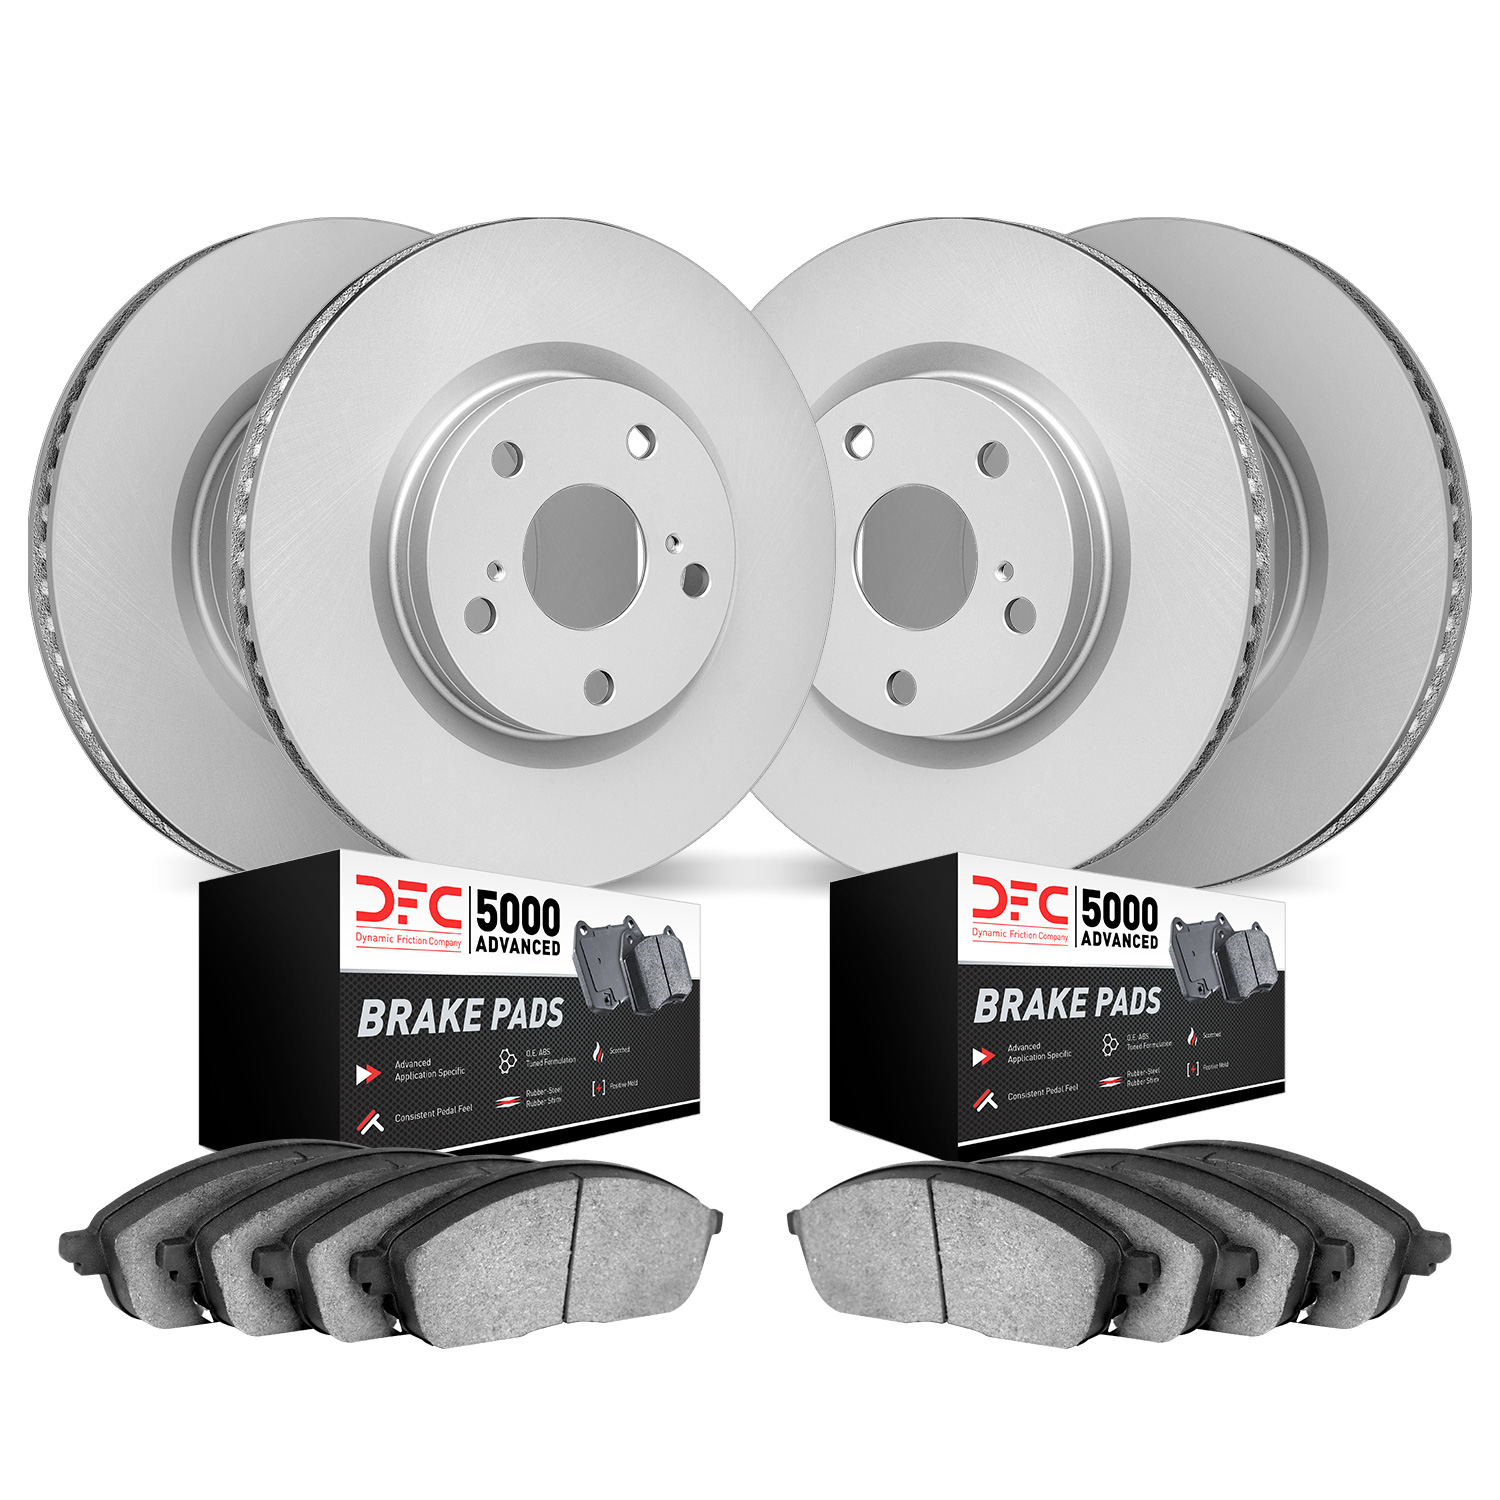 4504-63075 Geospec Brake Rotors w/5000 Advanced Brake Pads Kit, 2008-2015 Mercedes-Benz, Position: Front and Rear